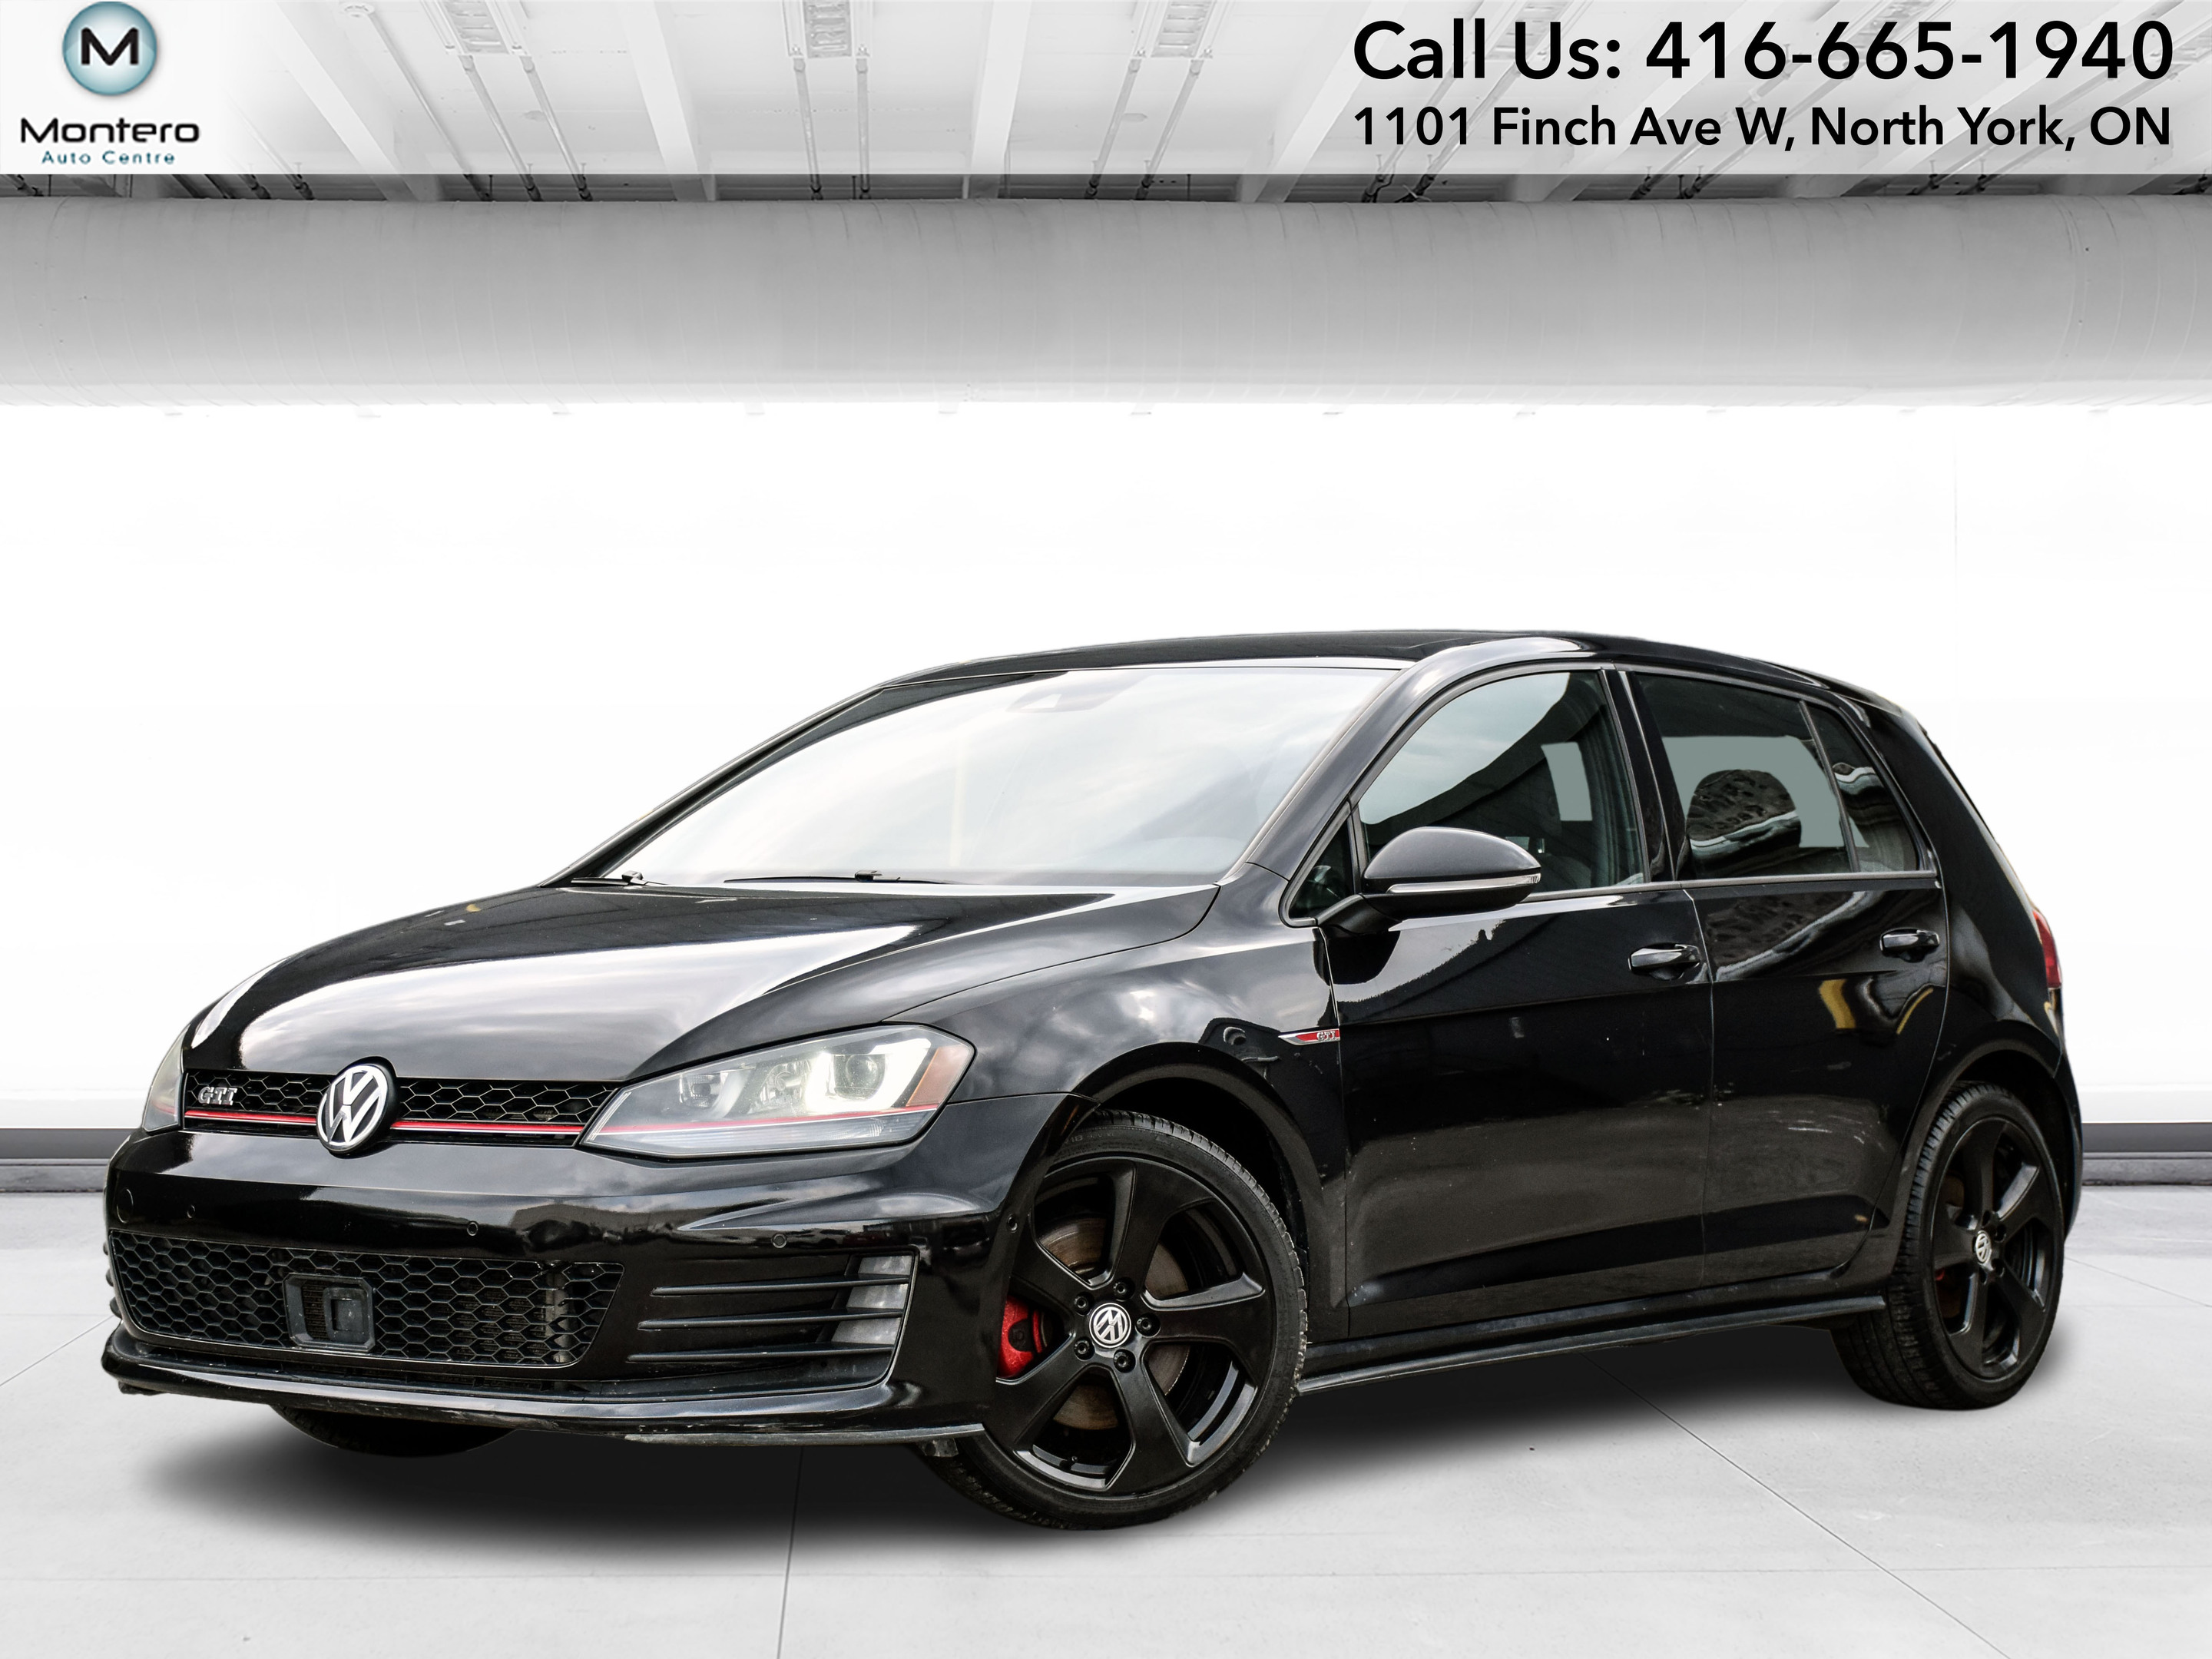 2016 Volkswagen Golf GTI AUTOBAHN EDITION AUTOMATIC LEATHER ROOF CAM 